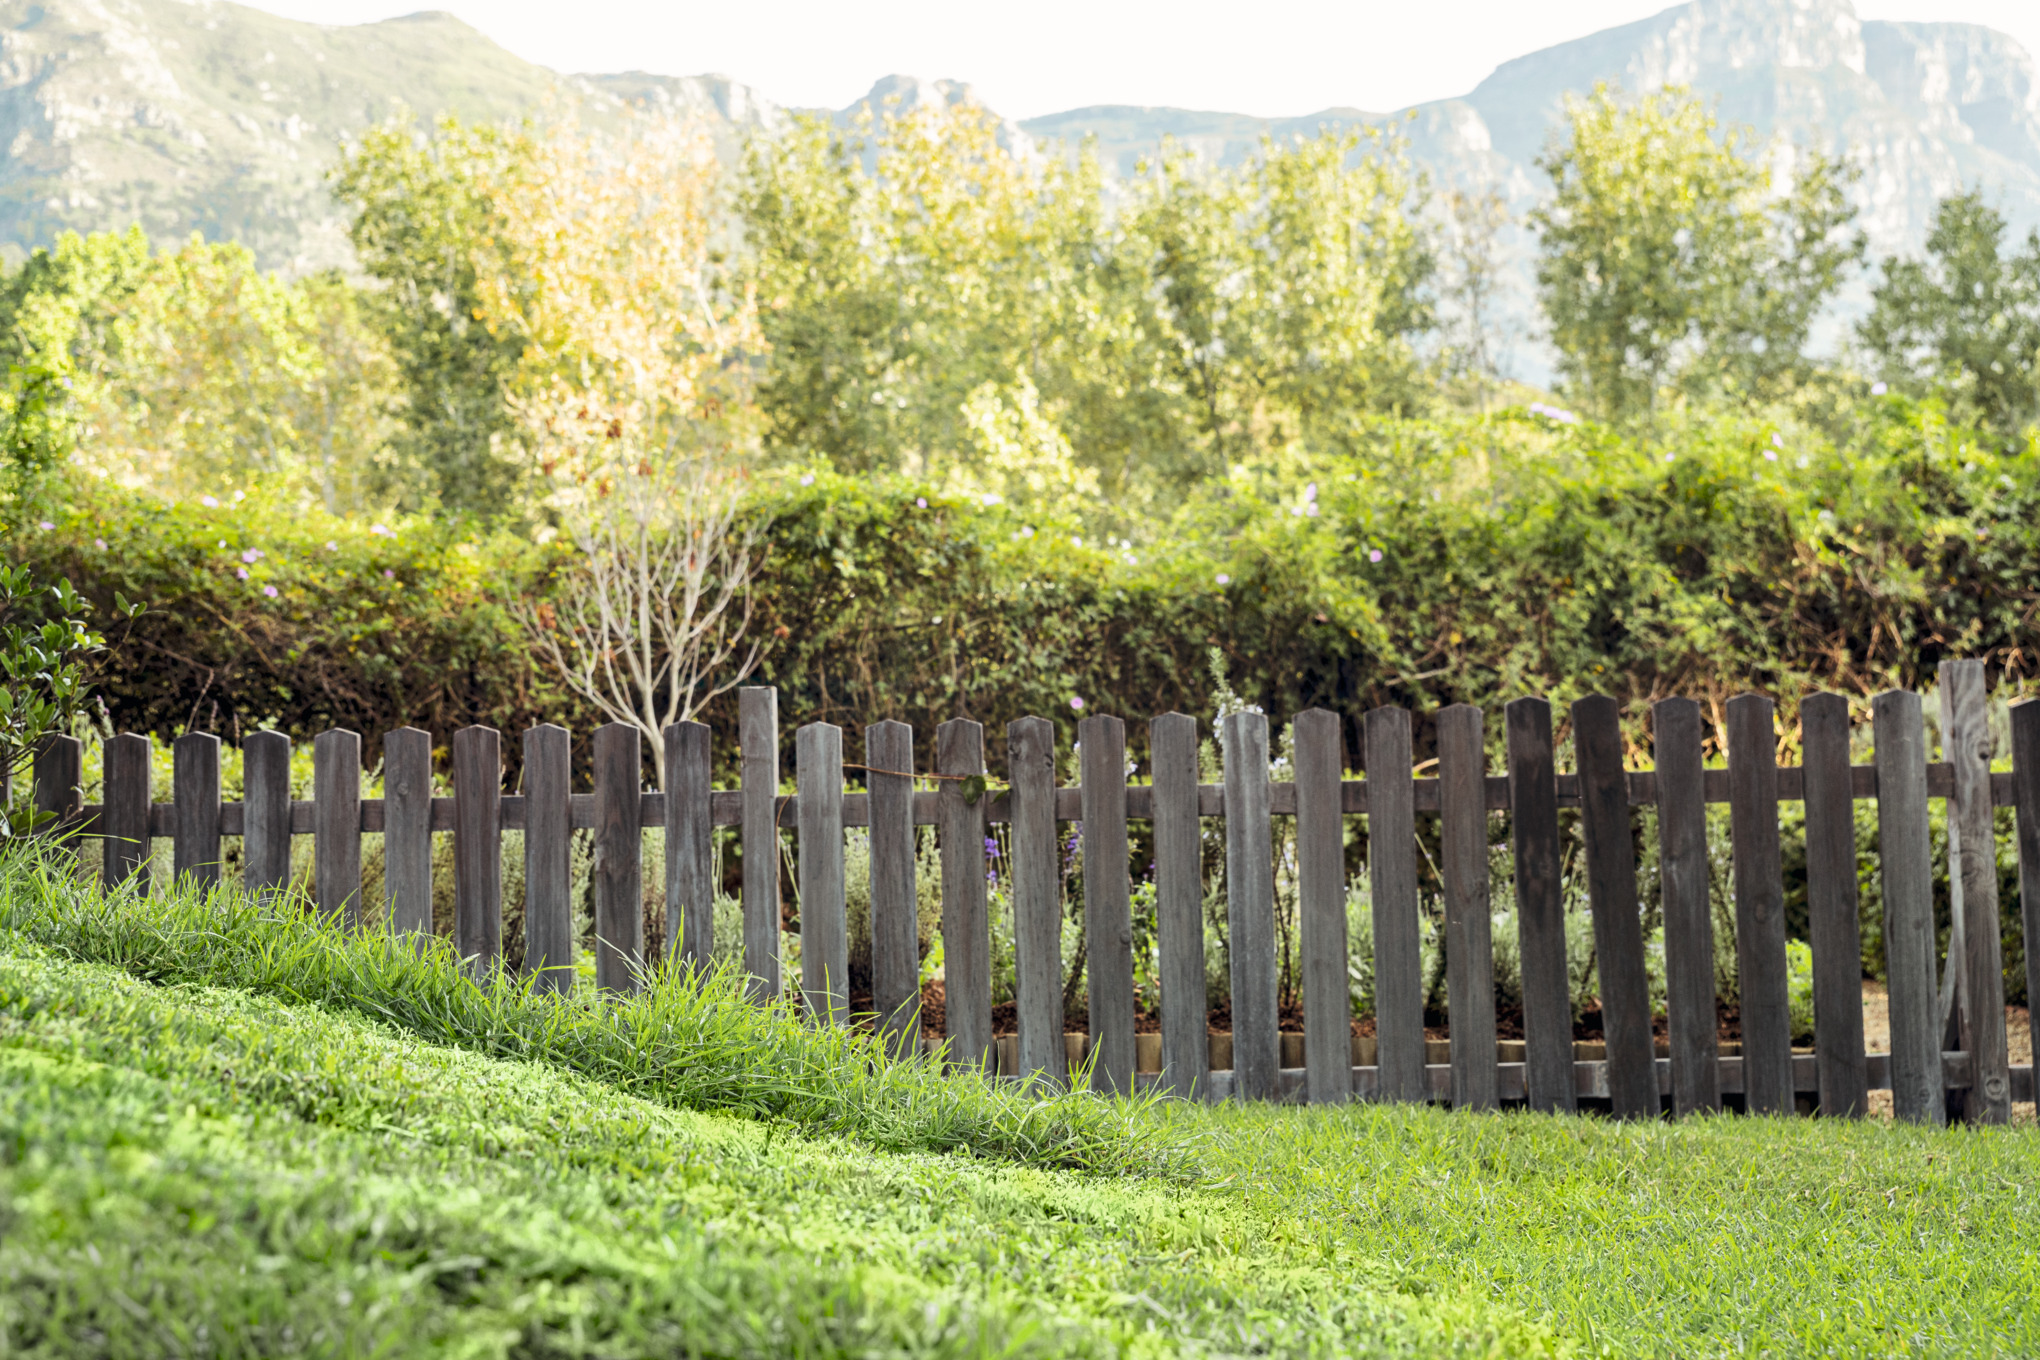 Uneven lawn in front of a wooden fence, trees and mountain panorama in the background